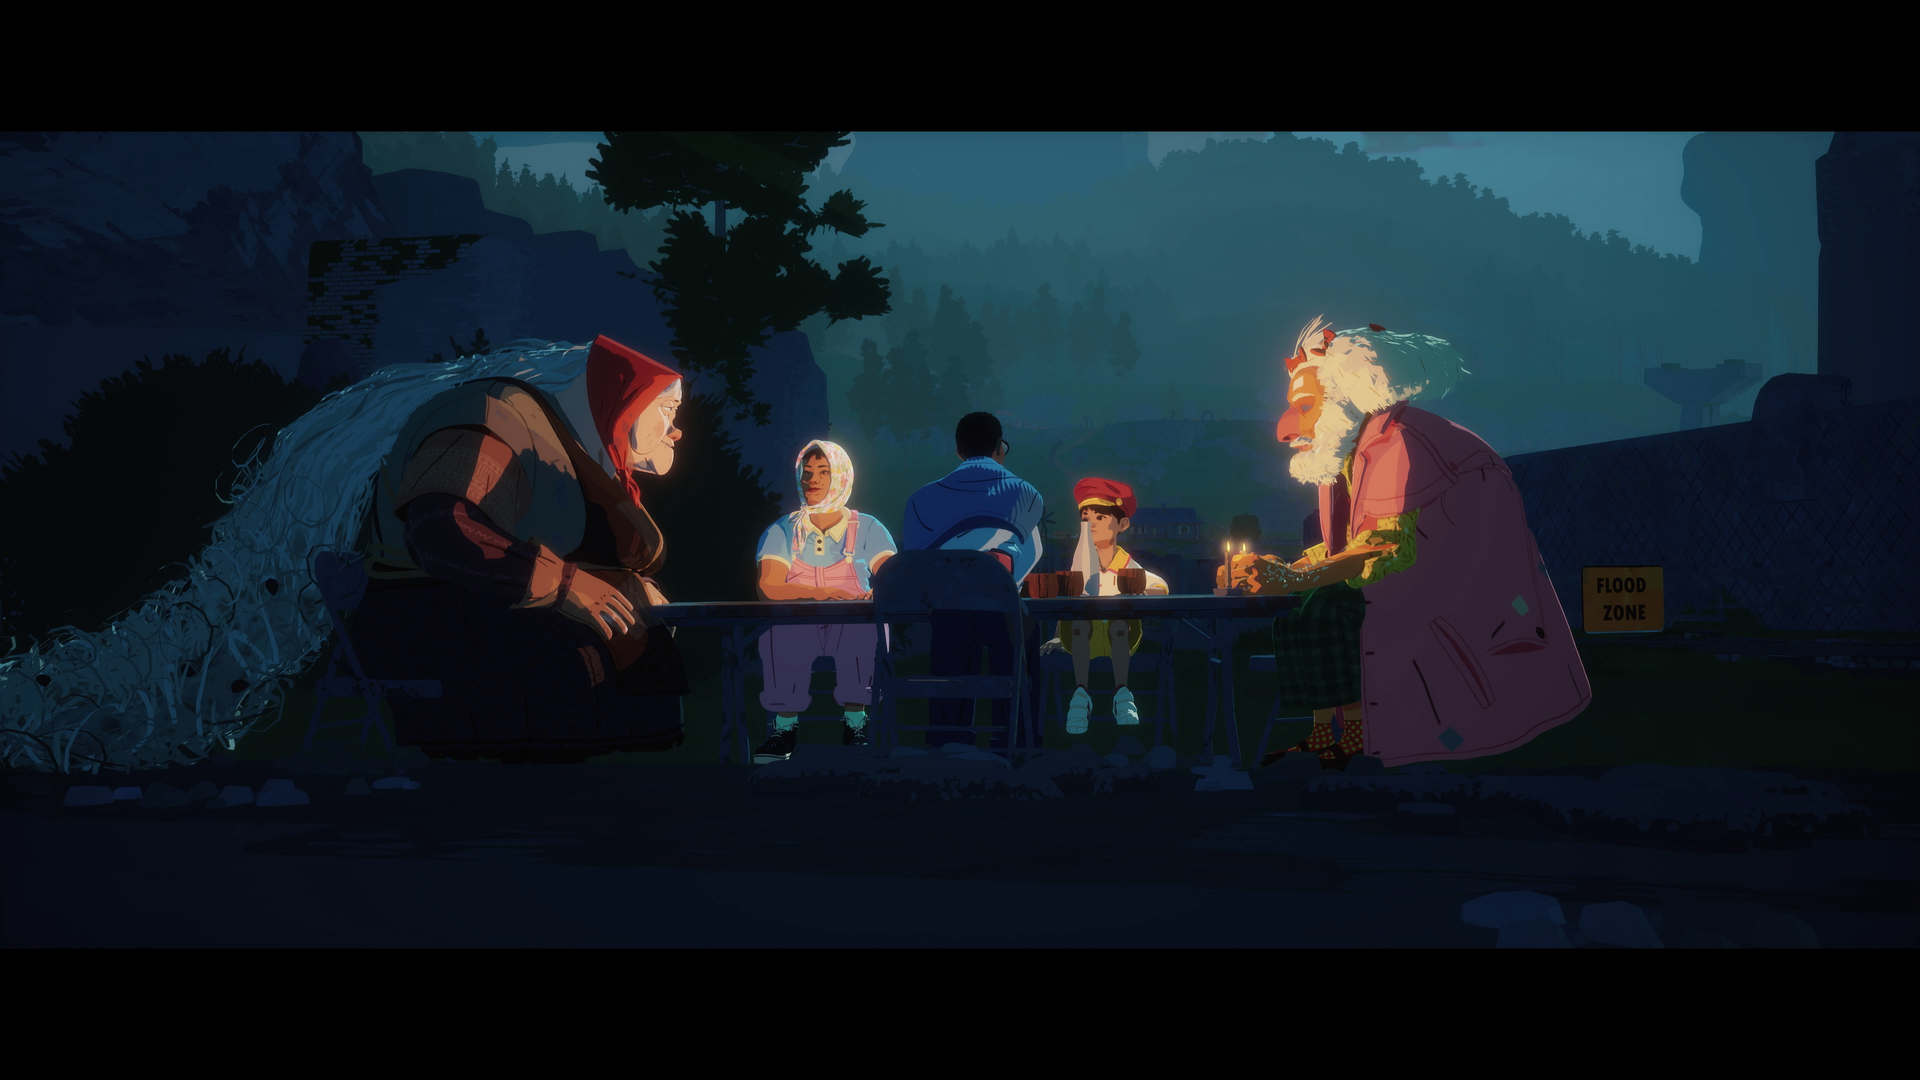 Five characters sit around a table at night, their faces are lit by candlelight, contrasting the  hard shadow of the forest around them.